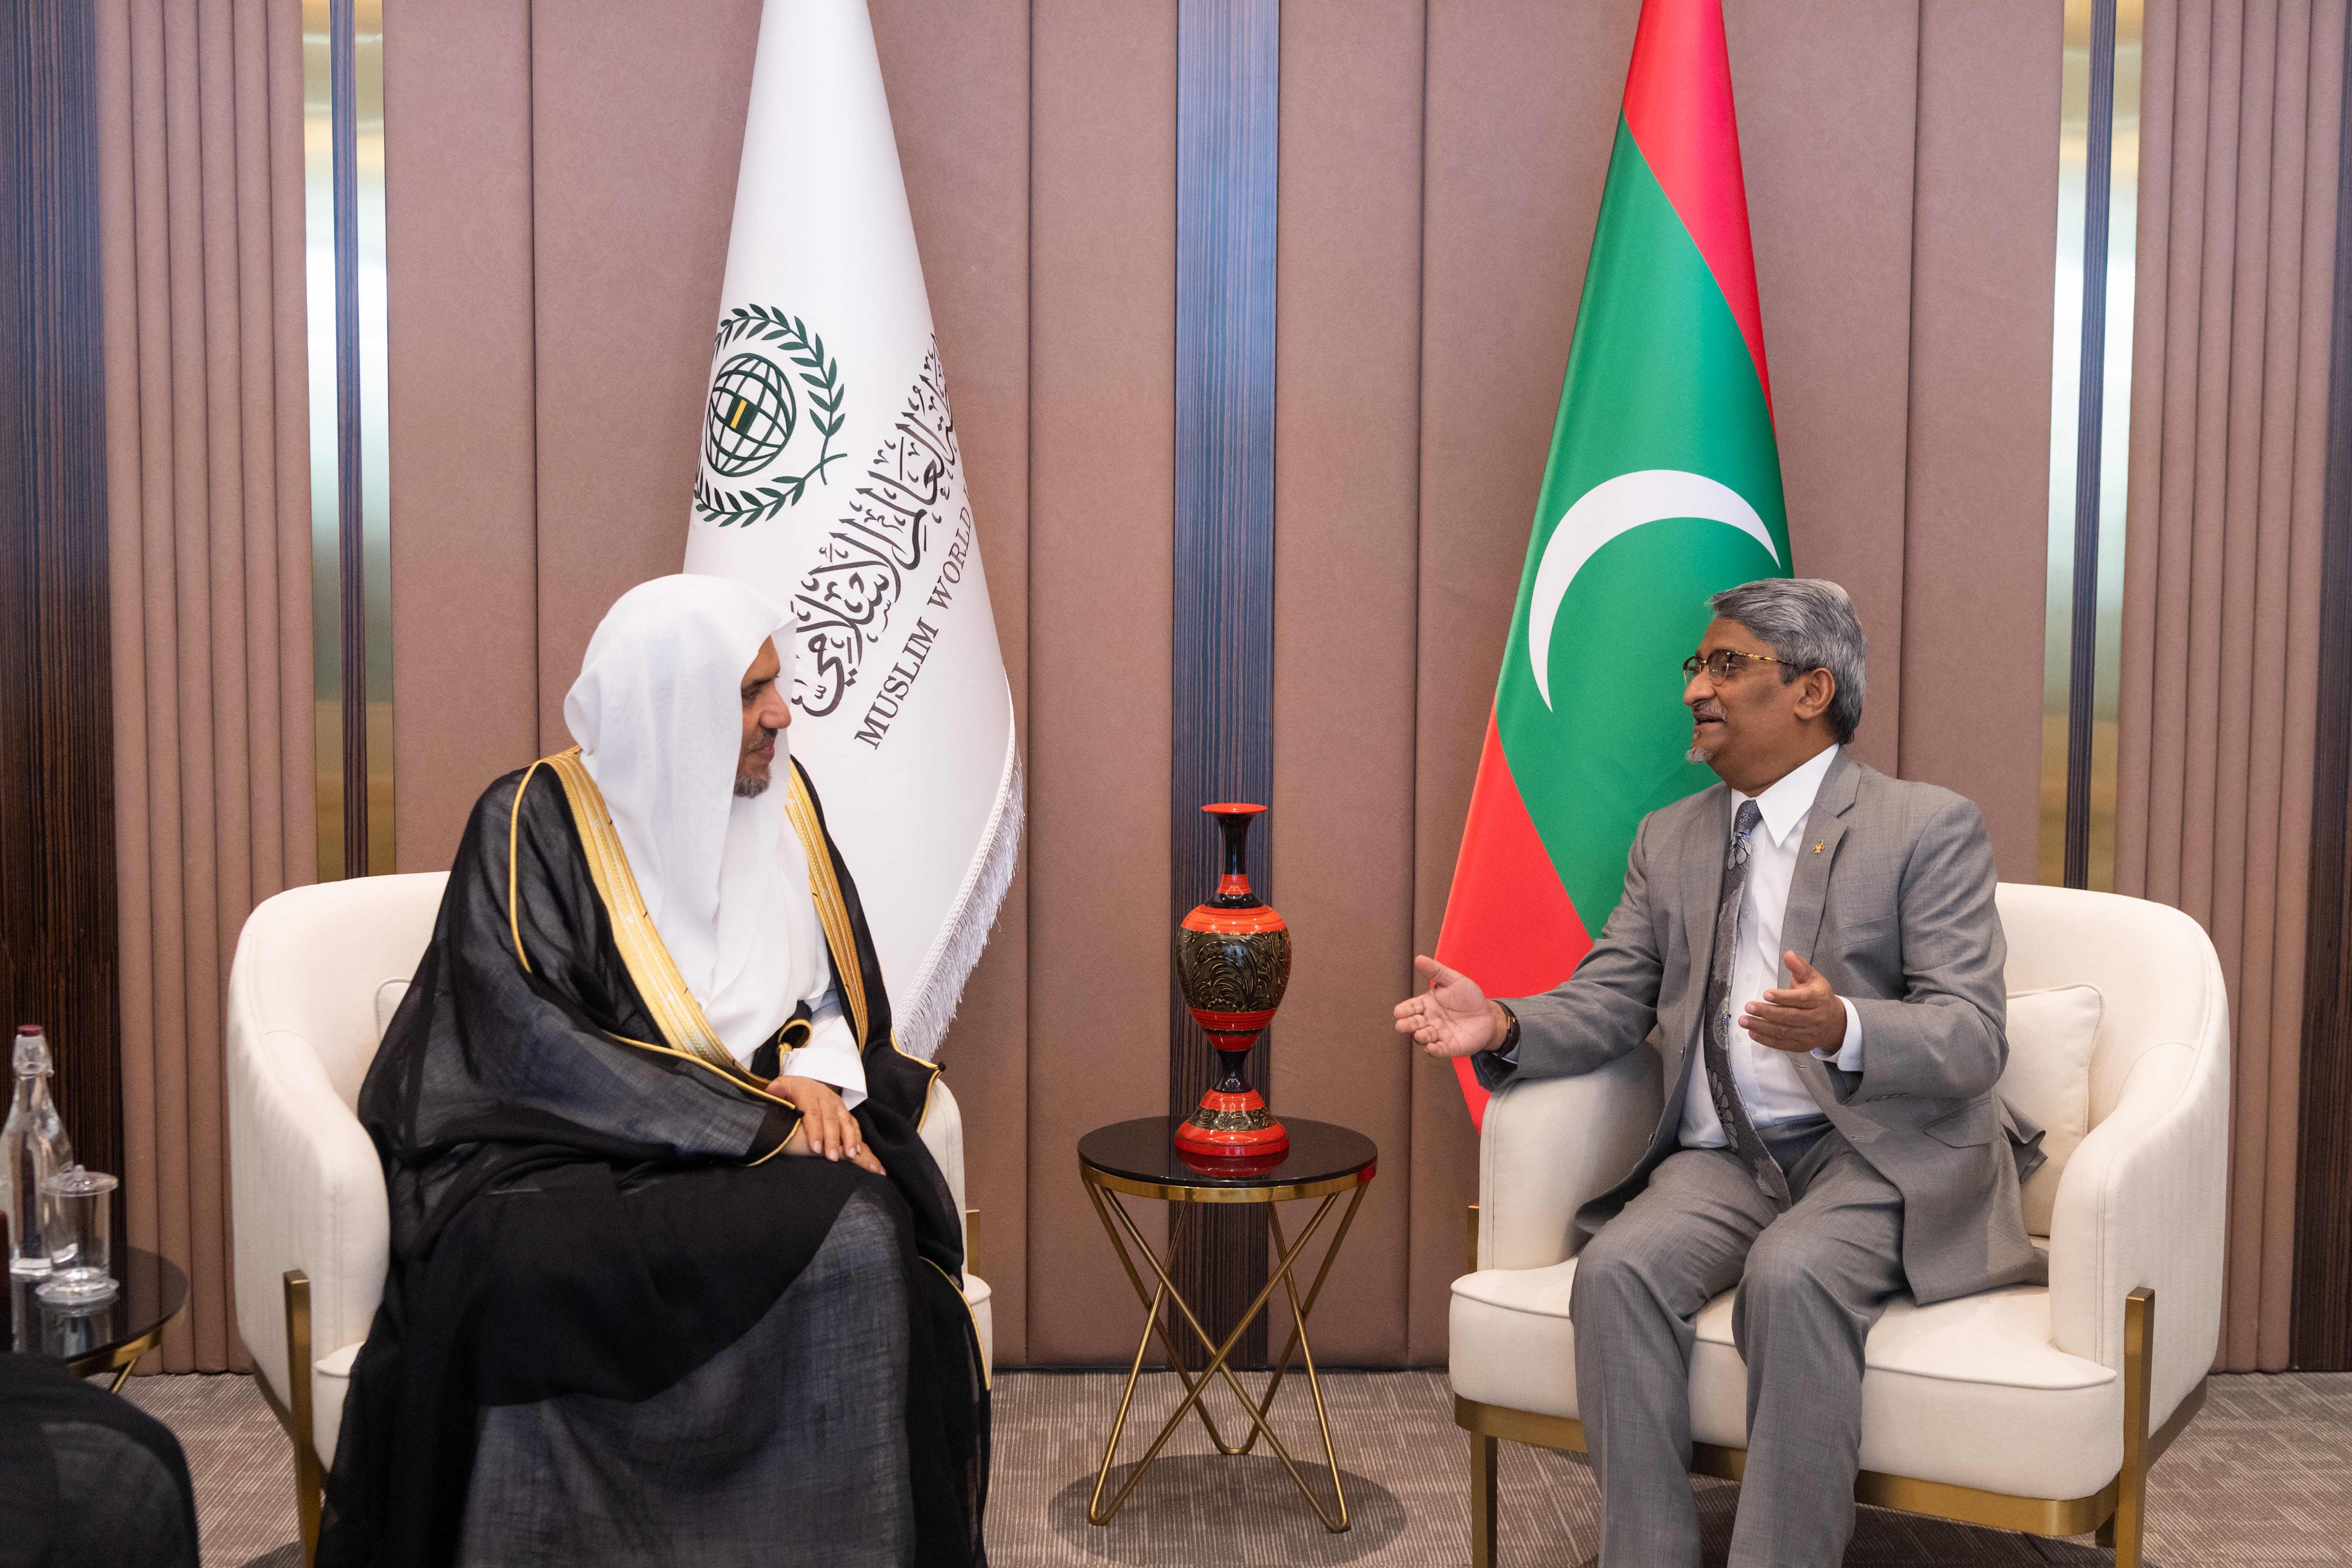 His Excellency Dr. Mohammad Alissa joined the Minister of Foreign Affairs of the Republic of Maldives, His Excellency Mr. Ahmed Khaleel